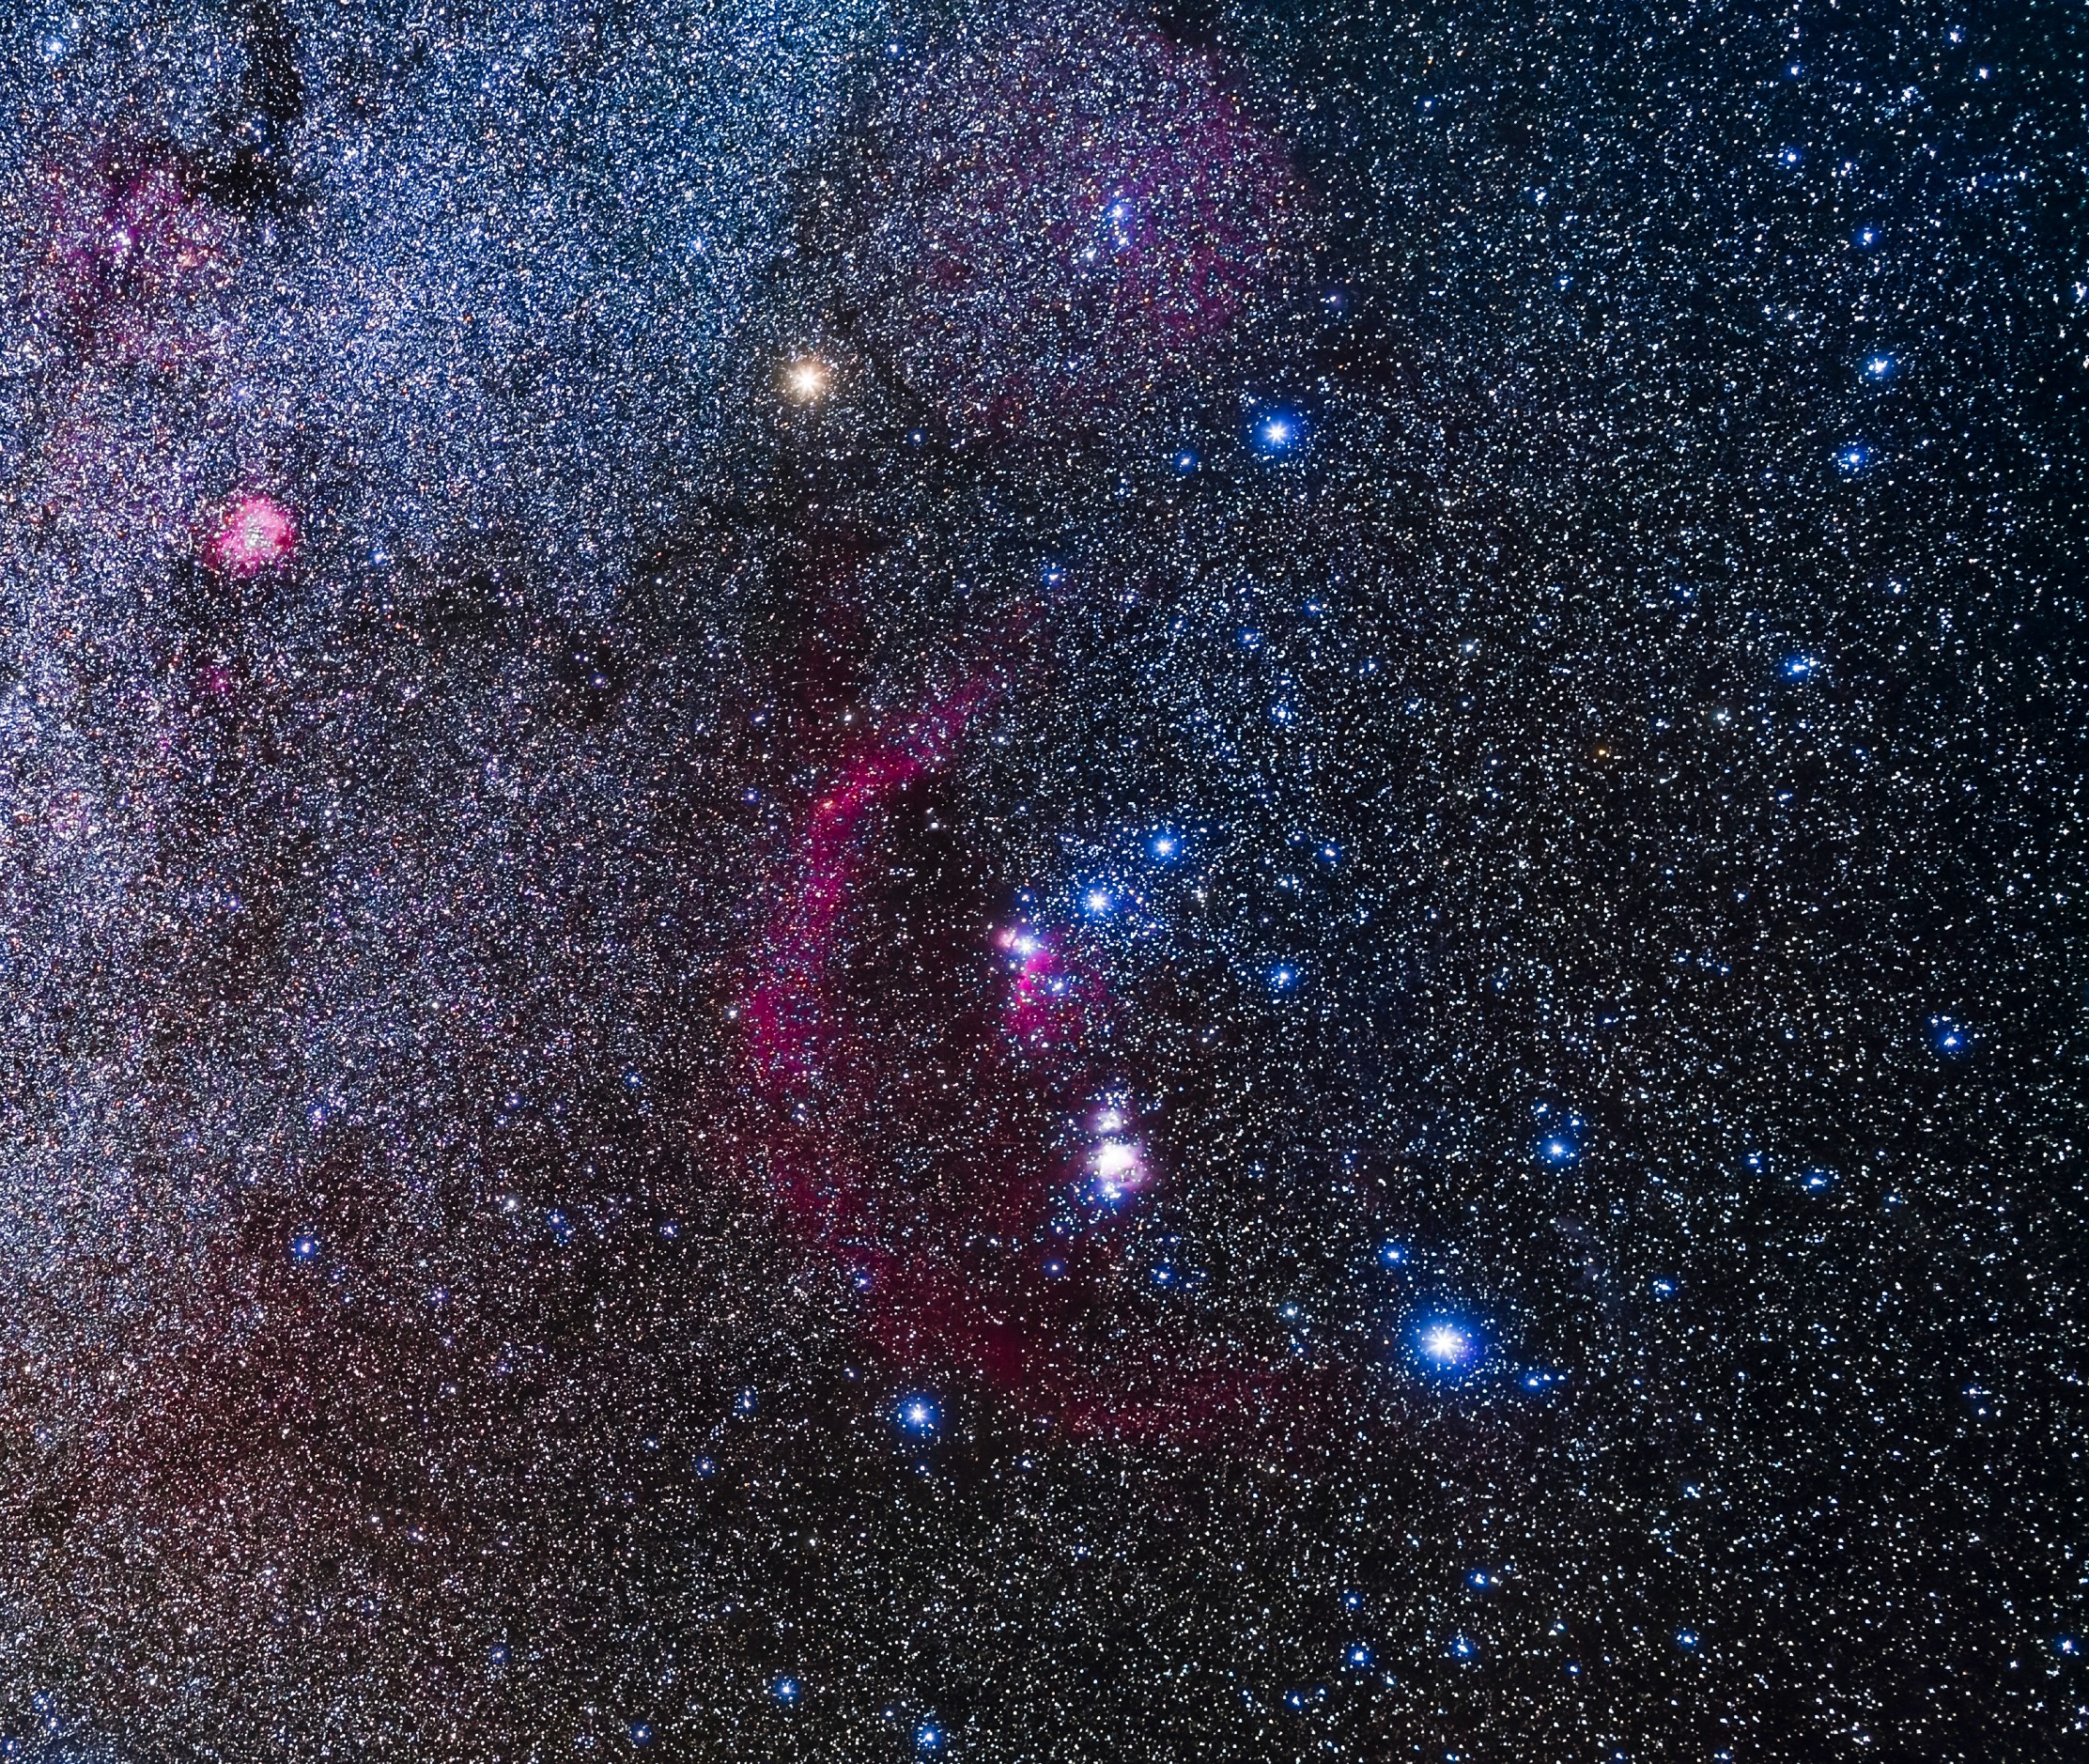 A picture of the Orion constellation and nebula in a starry sky